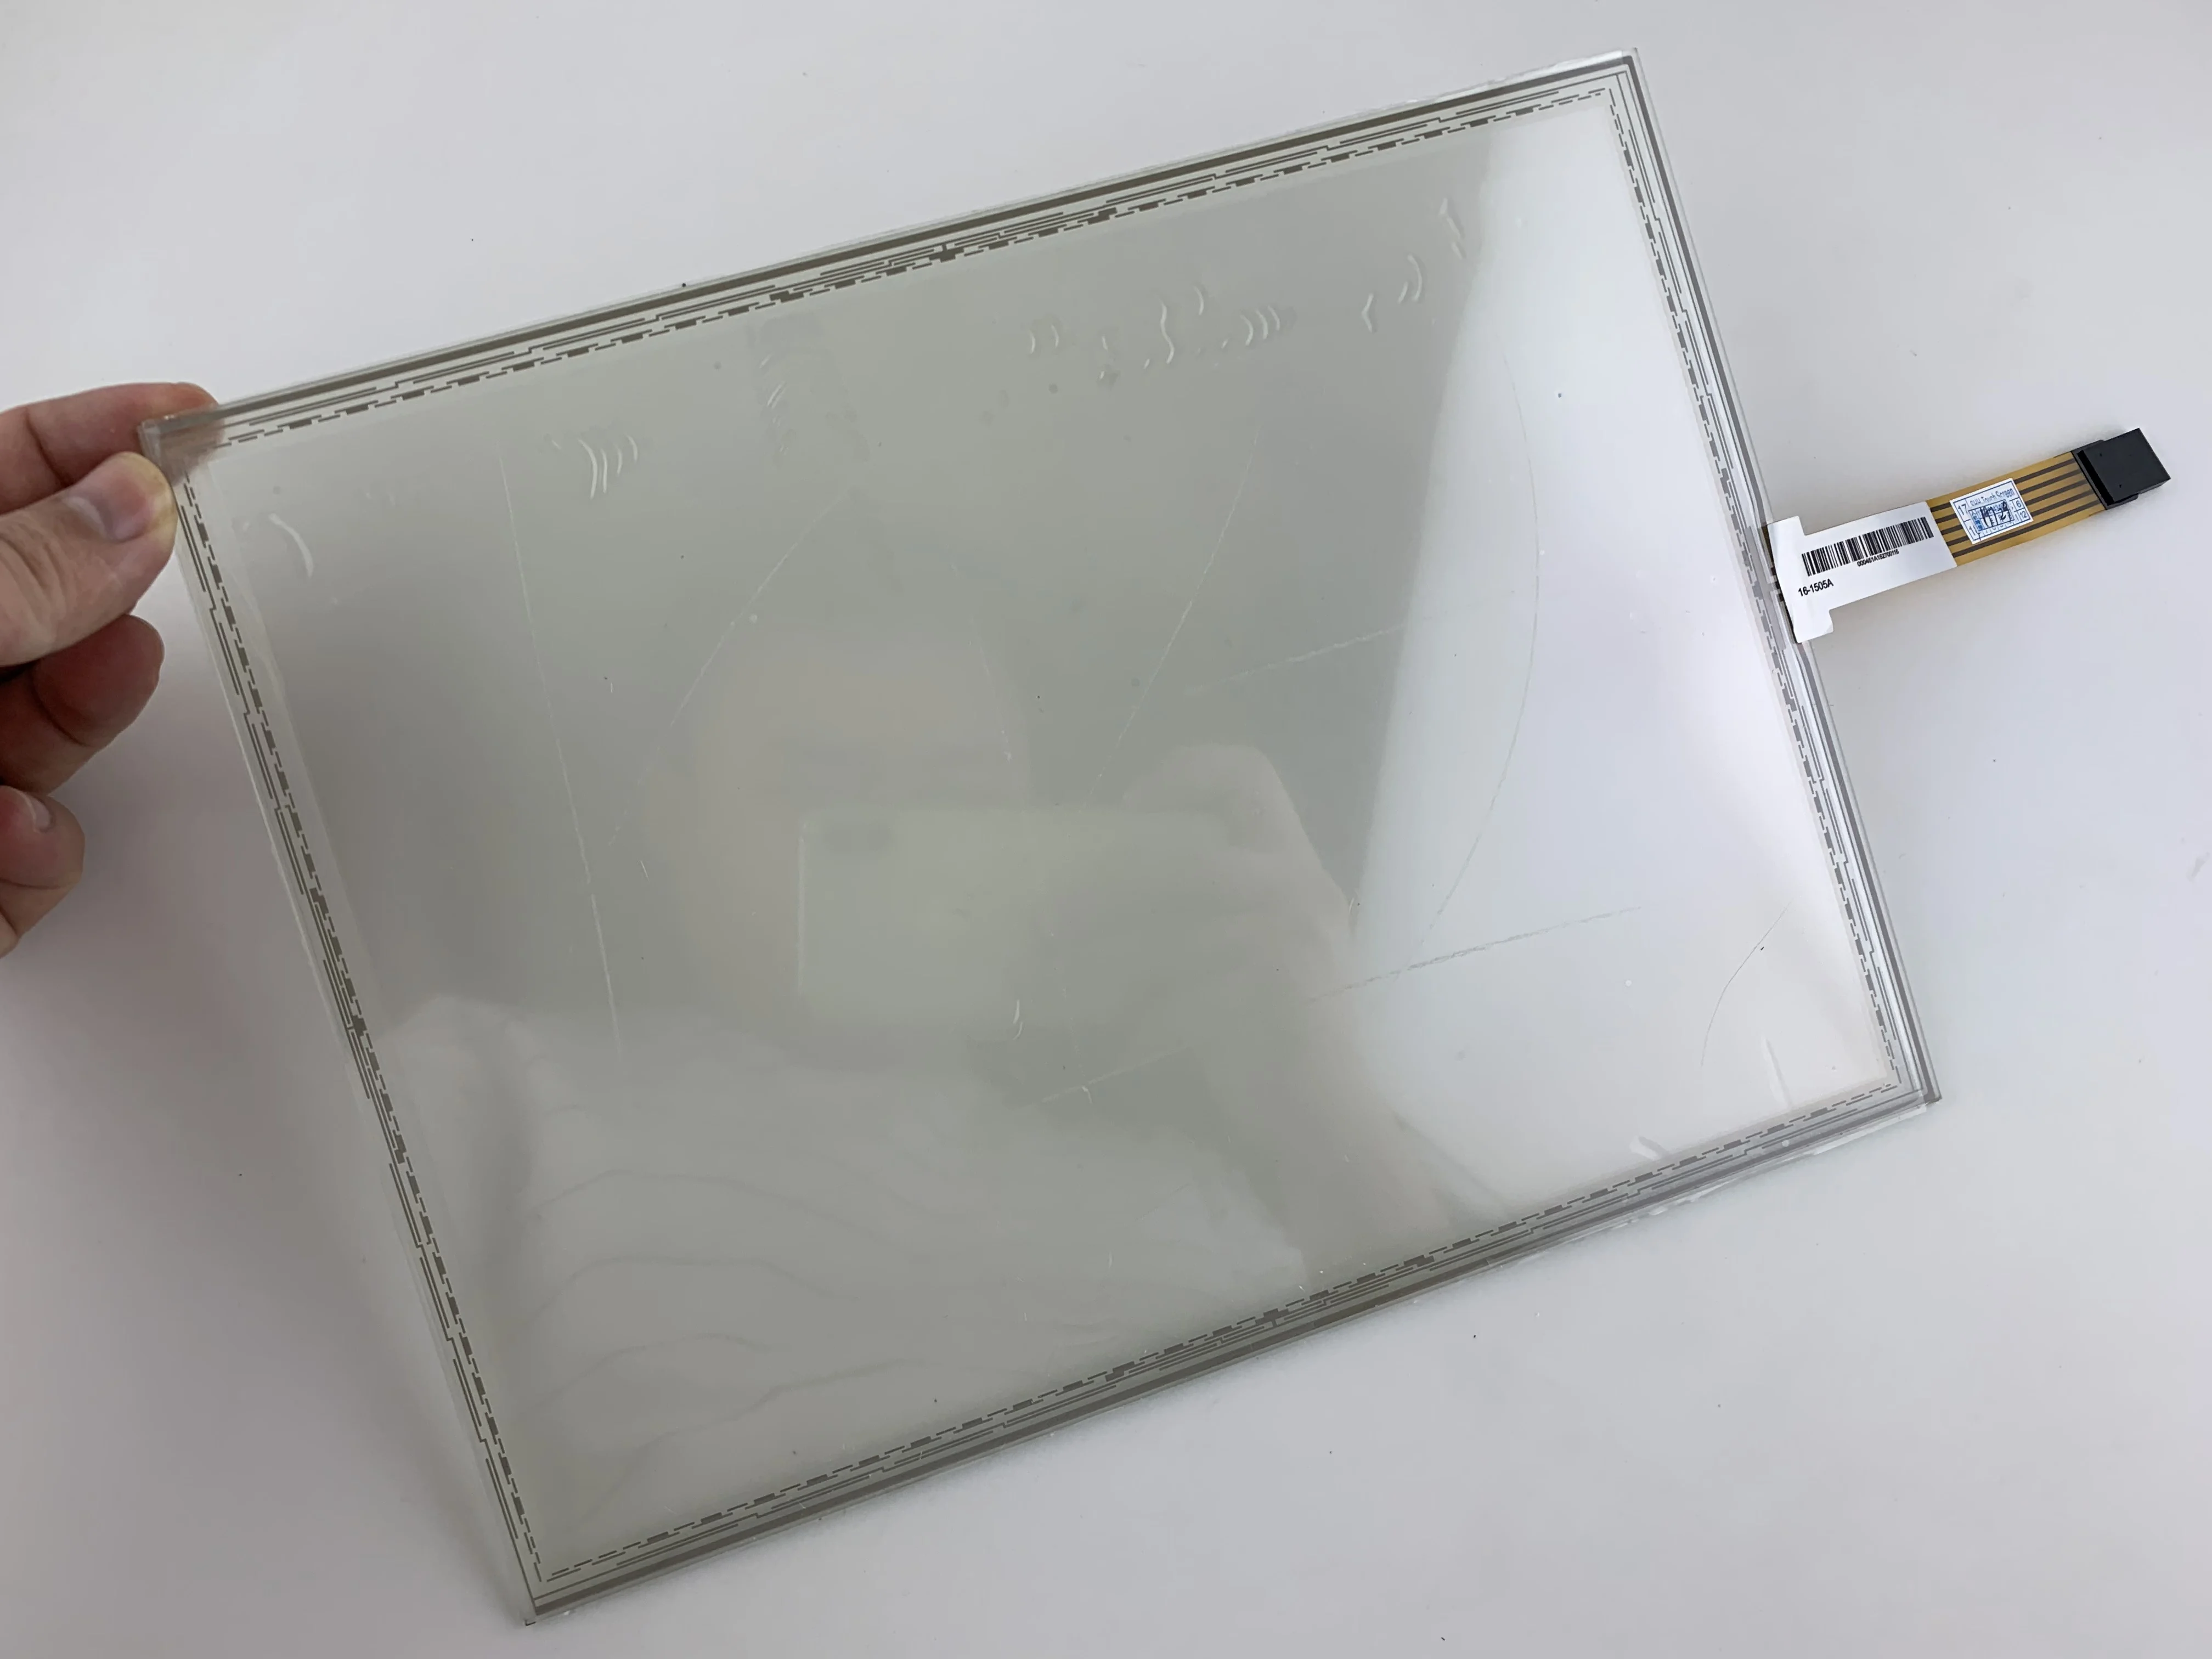 amt16003-amt-16003-amt-16003-replacement-touch-glass-panel-for-hmi-panel-repair~do-it-yourselfnew-have-in-stock